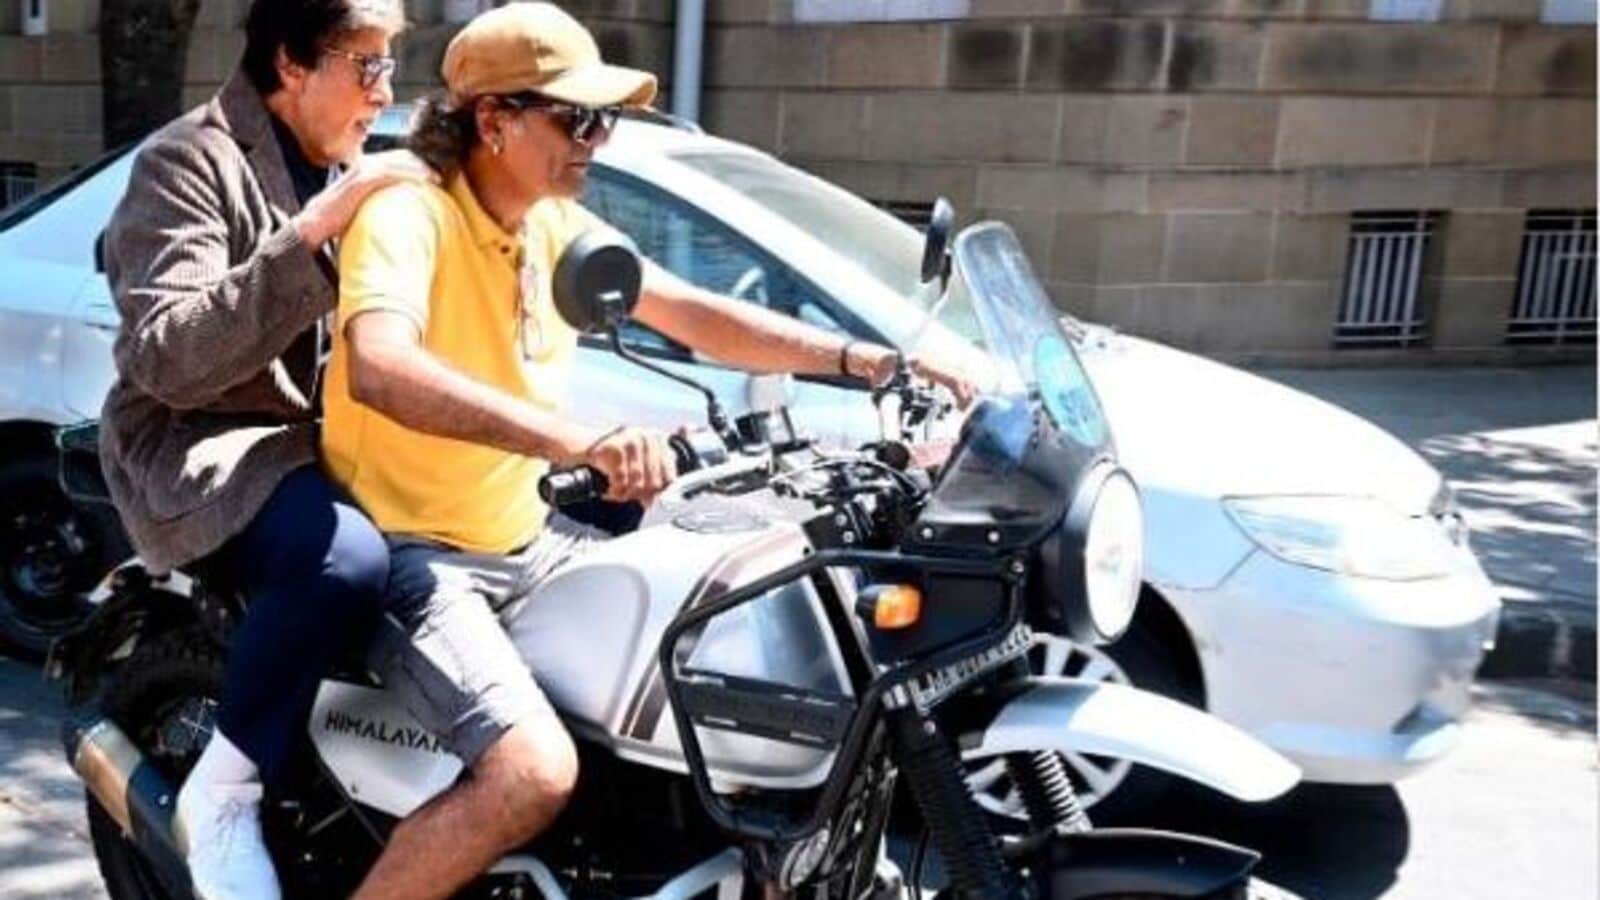 Amitabh Bachchan clarifies bike ride was on a shoot; did not violate any rules